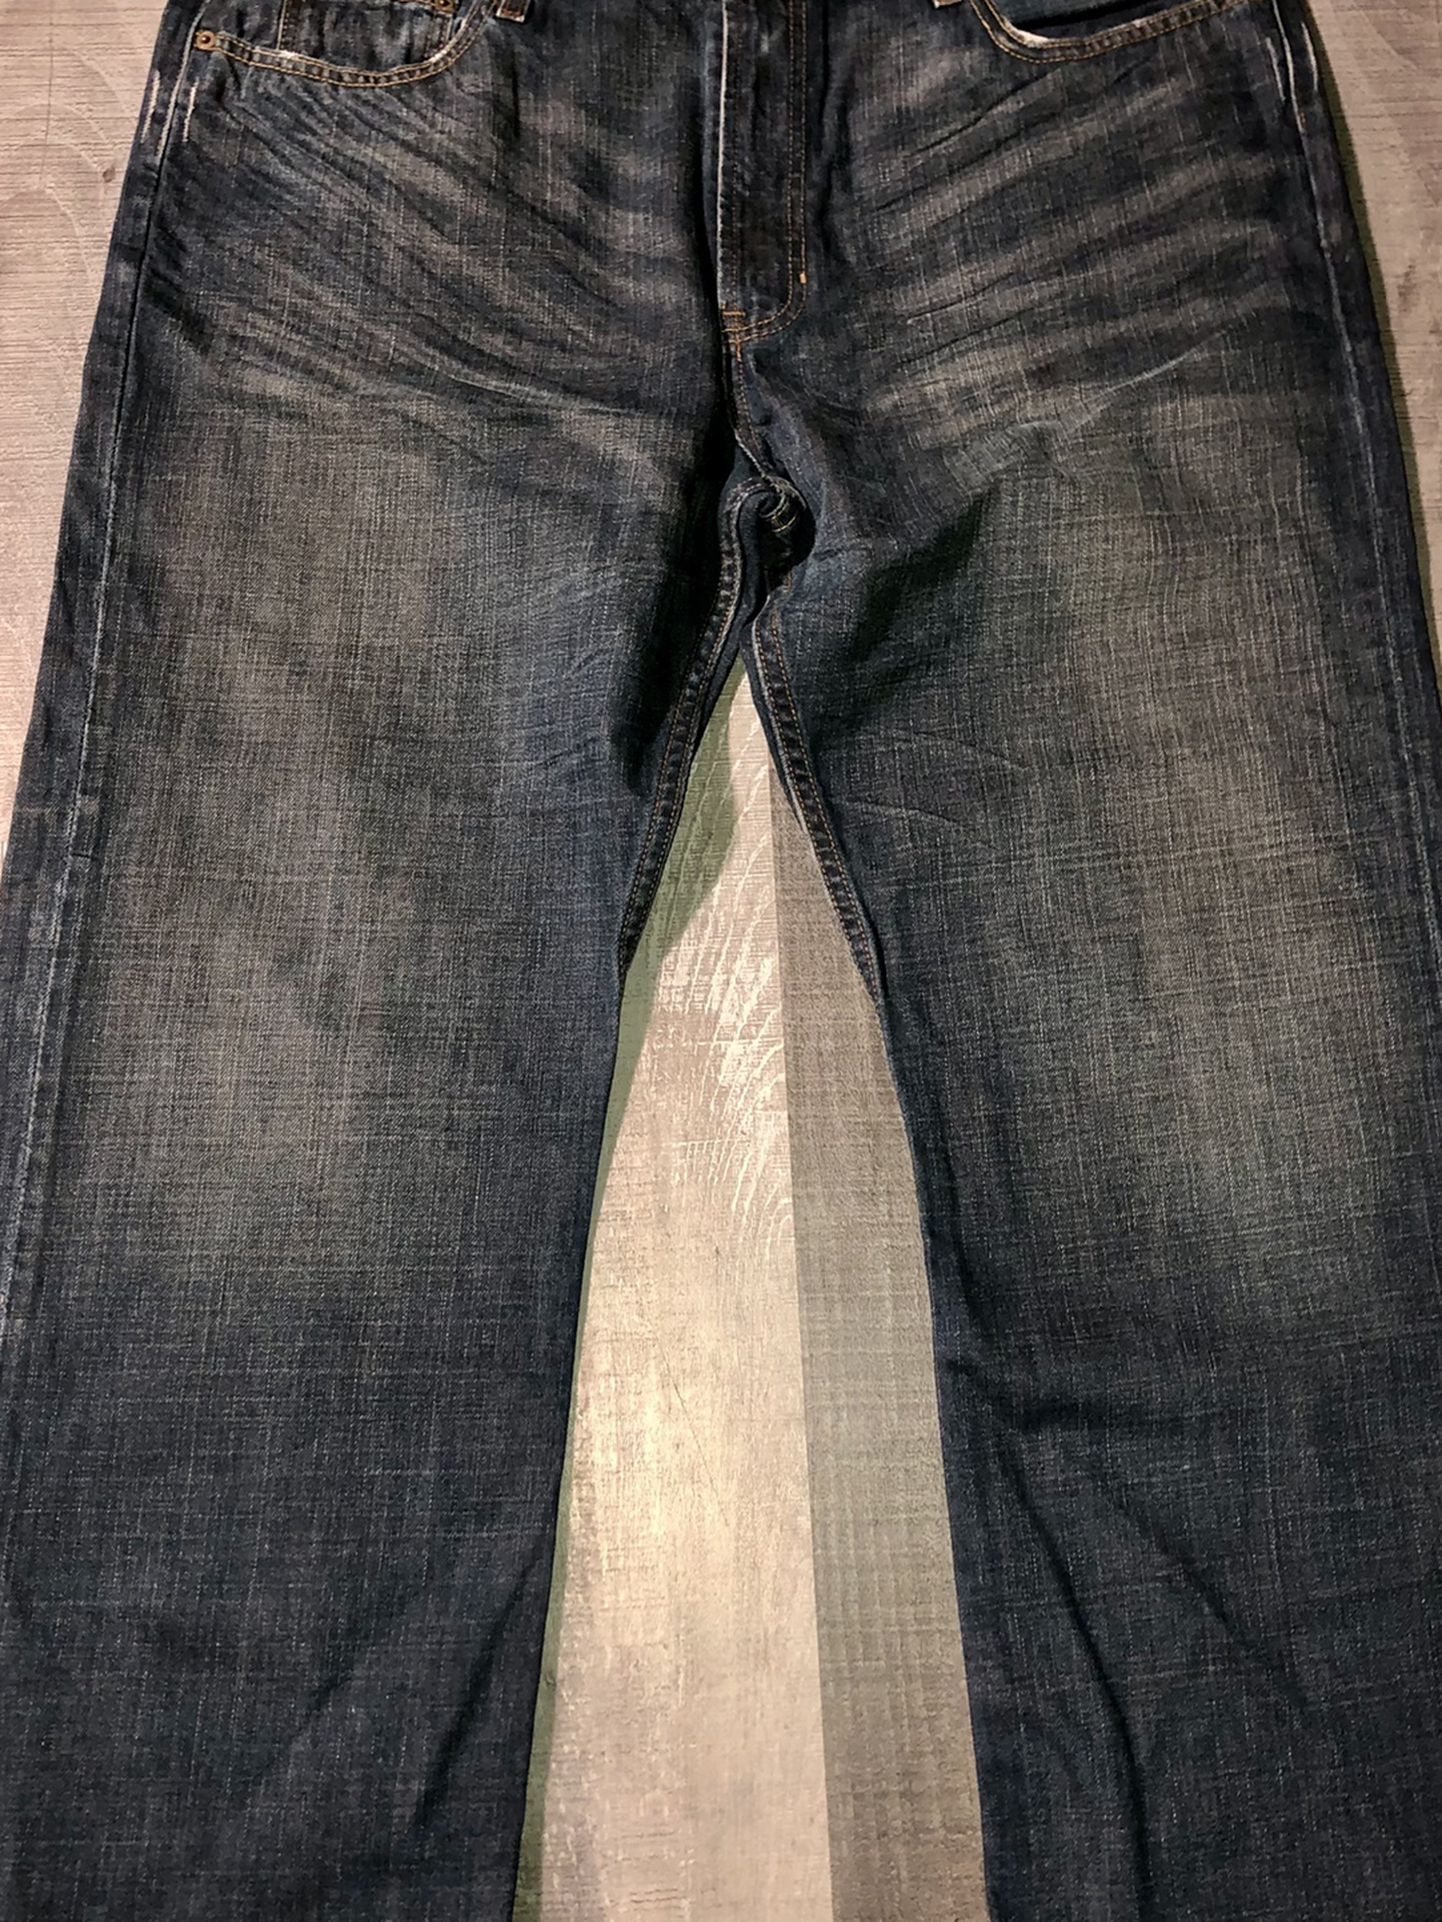 Gently Used Men’s GAP denim Loose Boot Fit Jeans Size 40x30